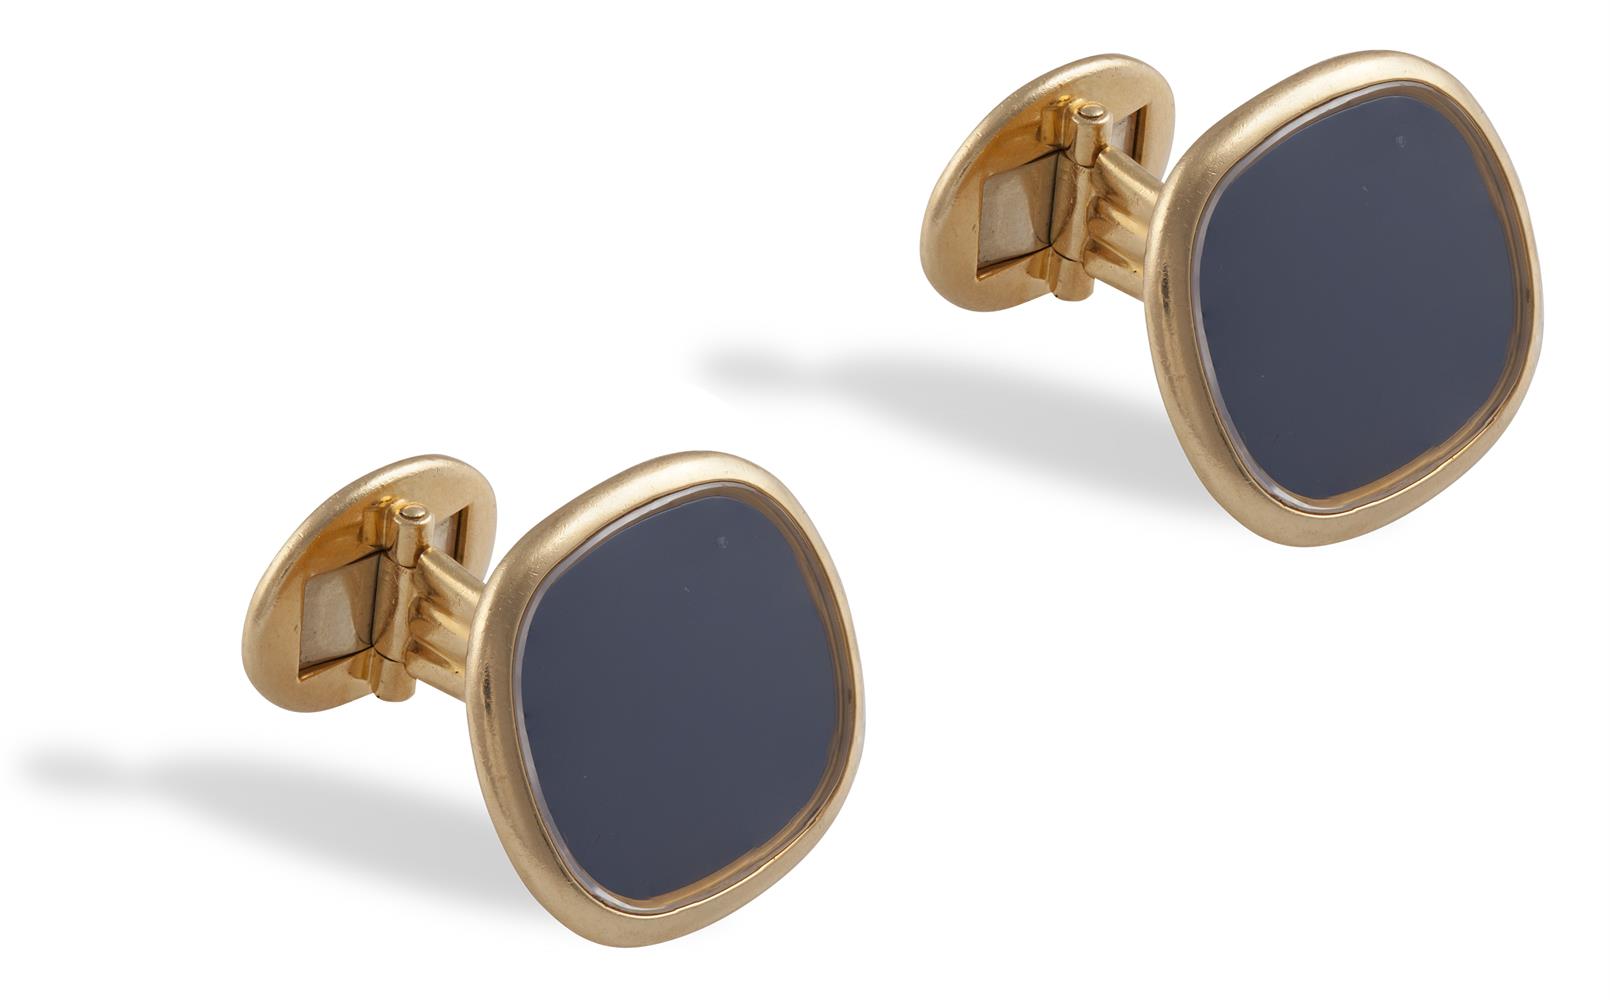 A PAIR OF ELLIPSE D'OR CUFFLINKS, BY PATEK PHILIPPESet to the centre with a cushion-shaped blue